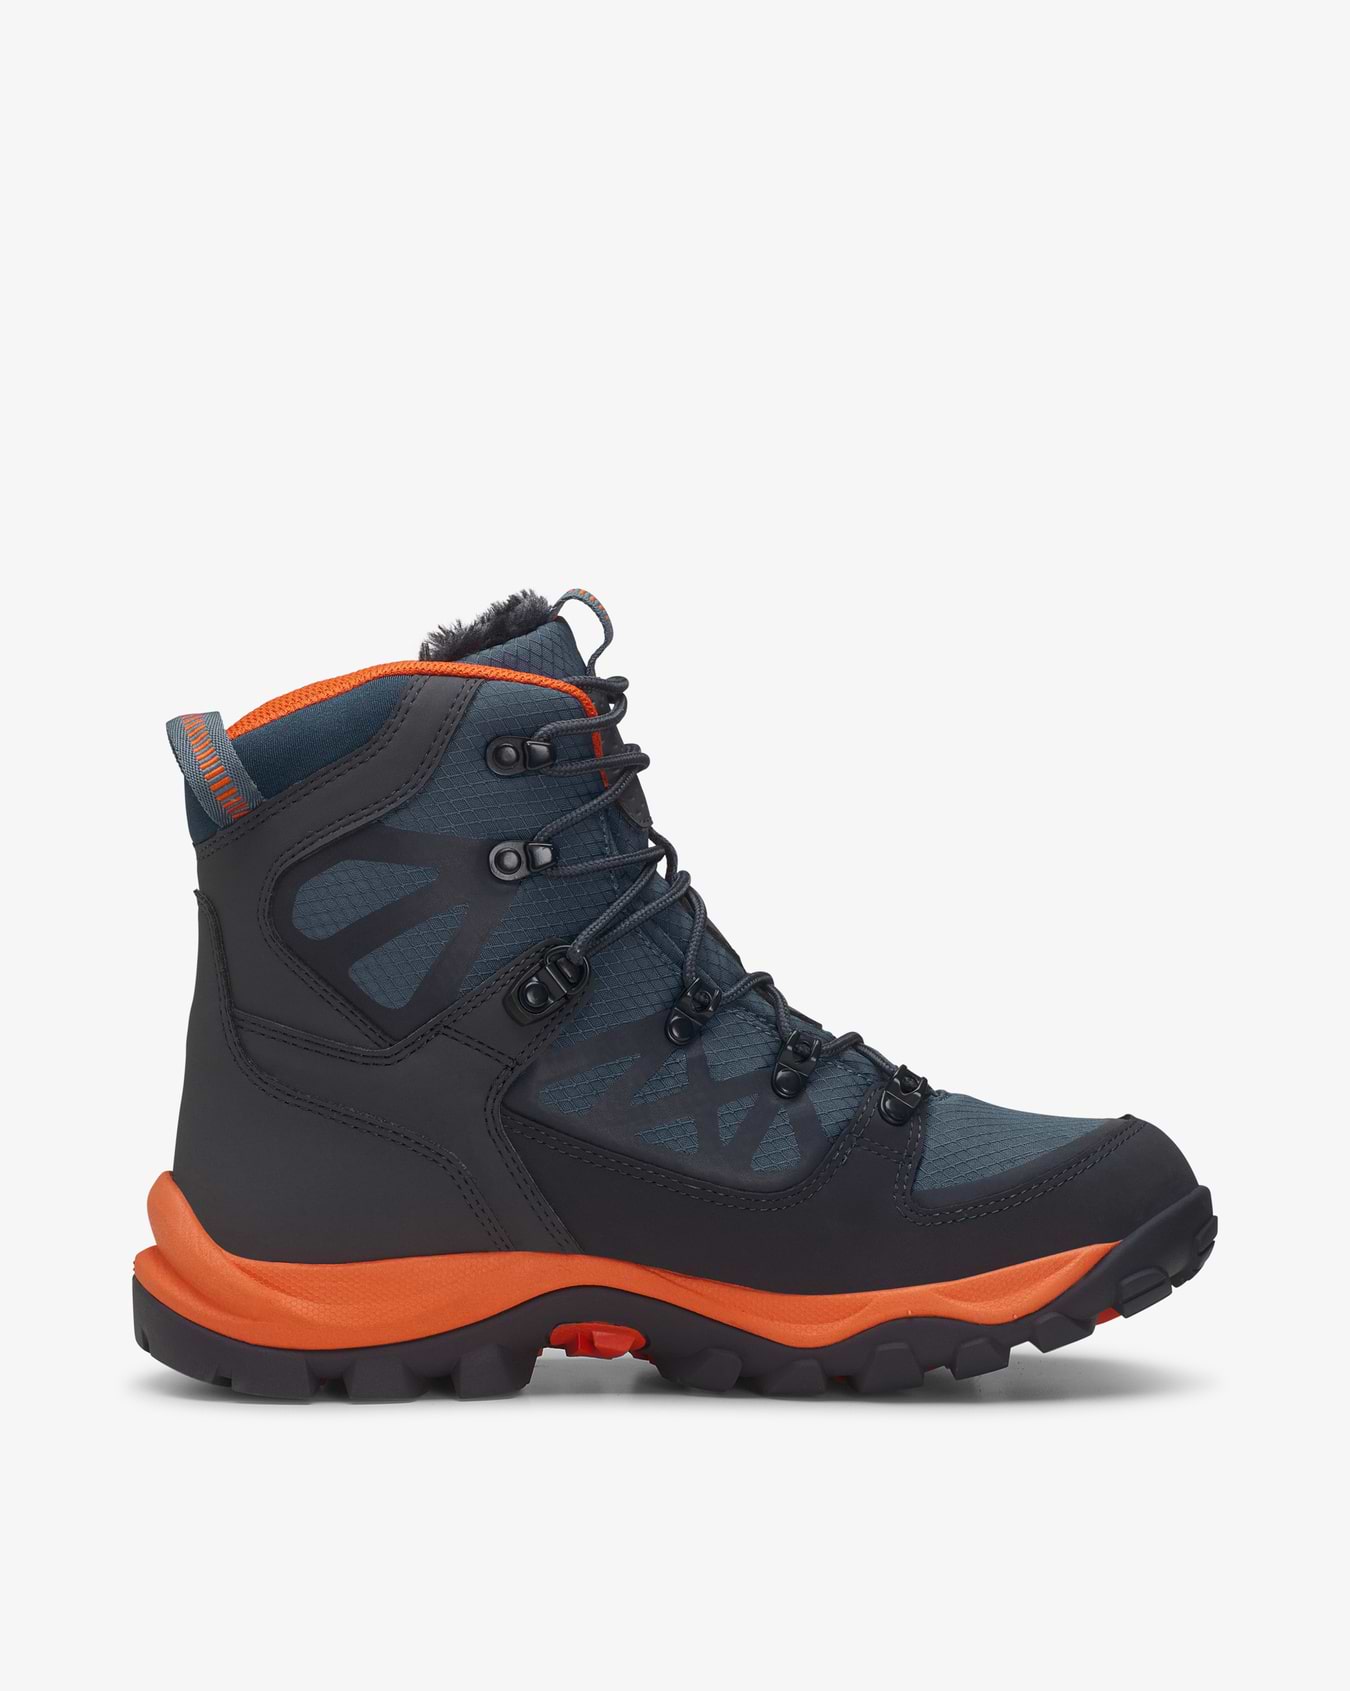 Constrictor High WP M Navy/Demin Hiking